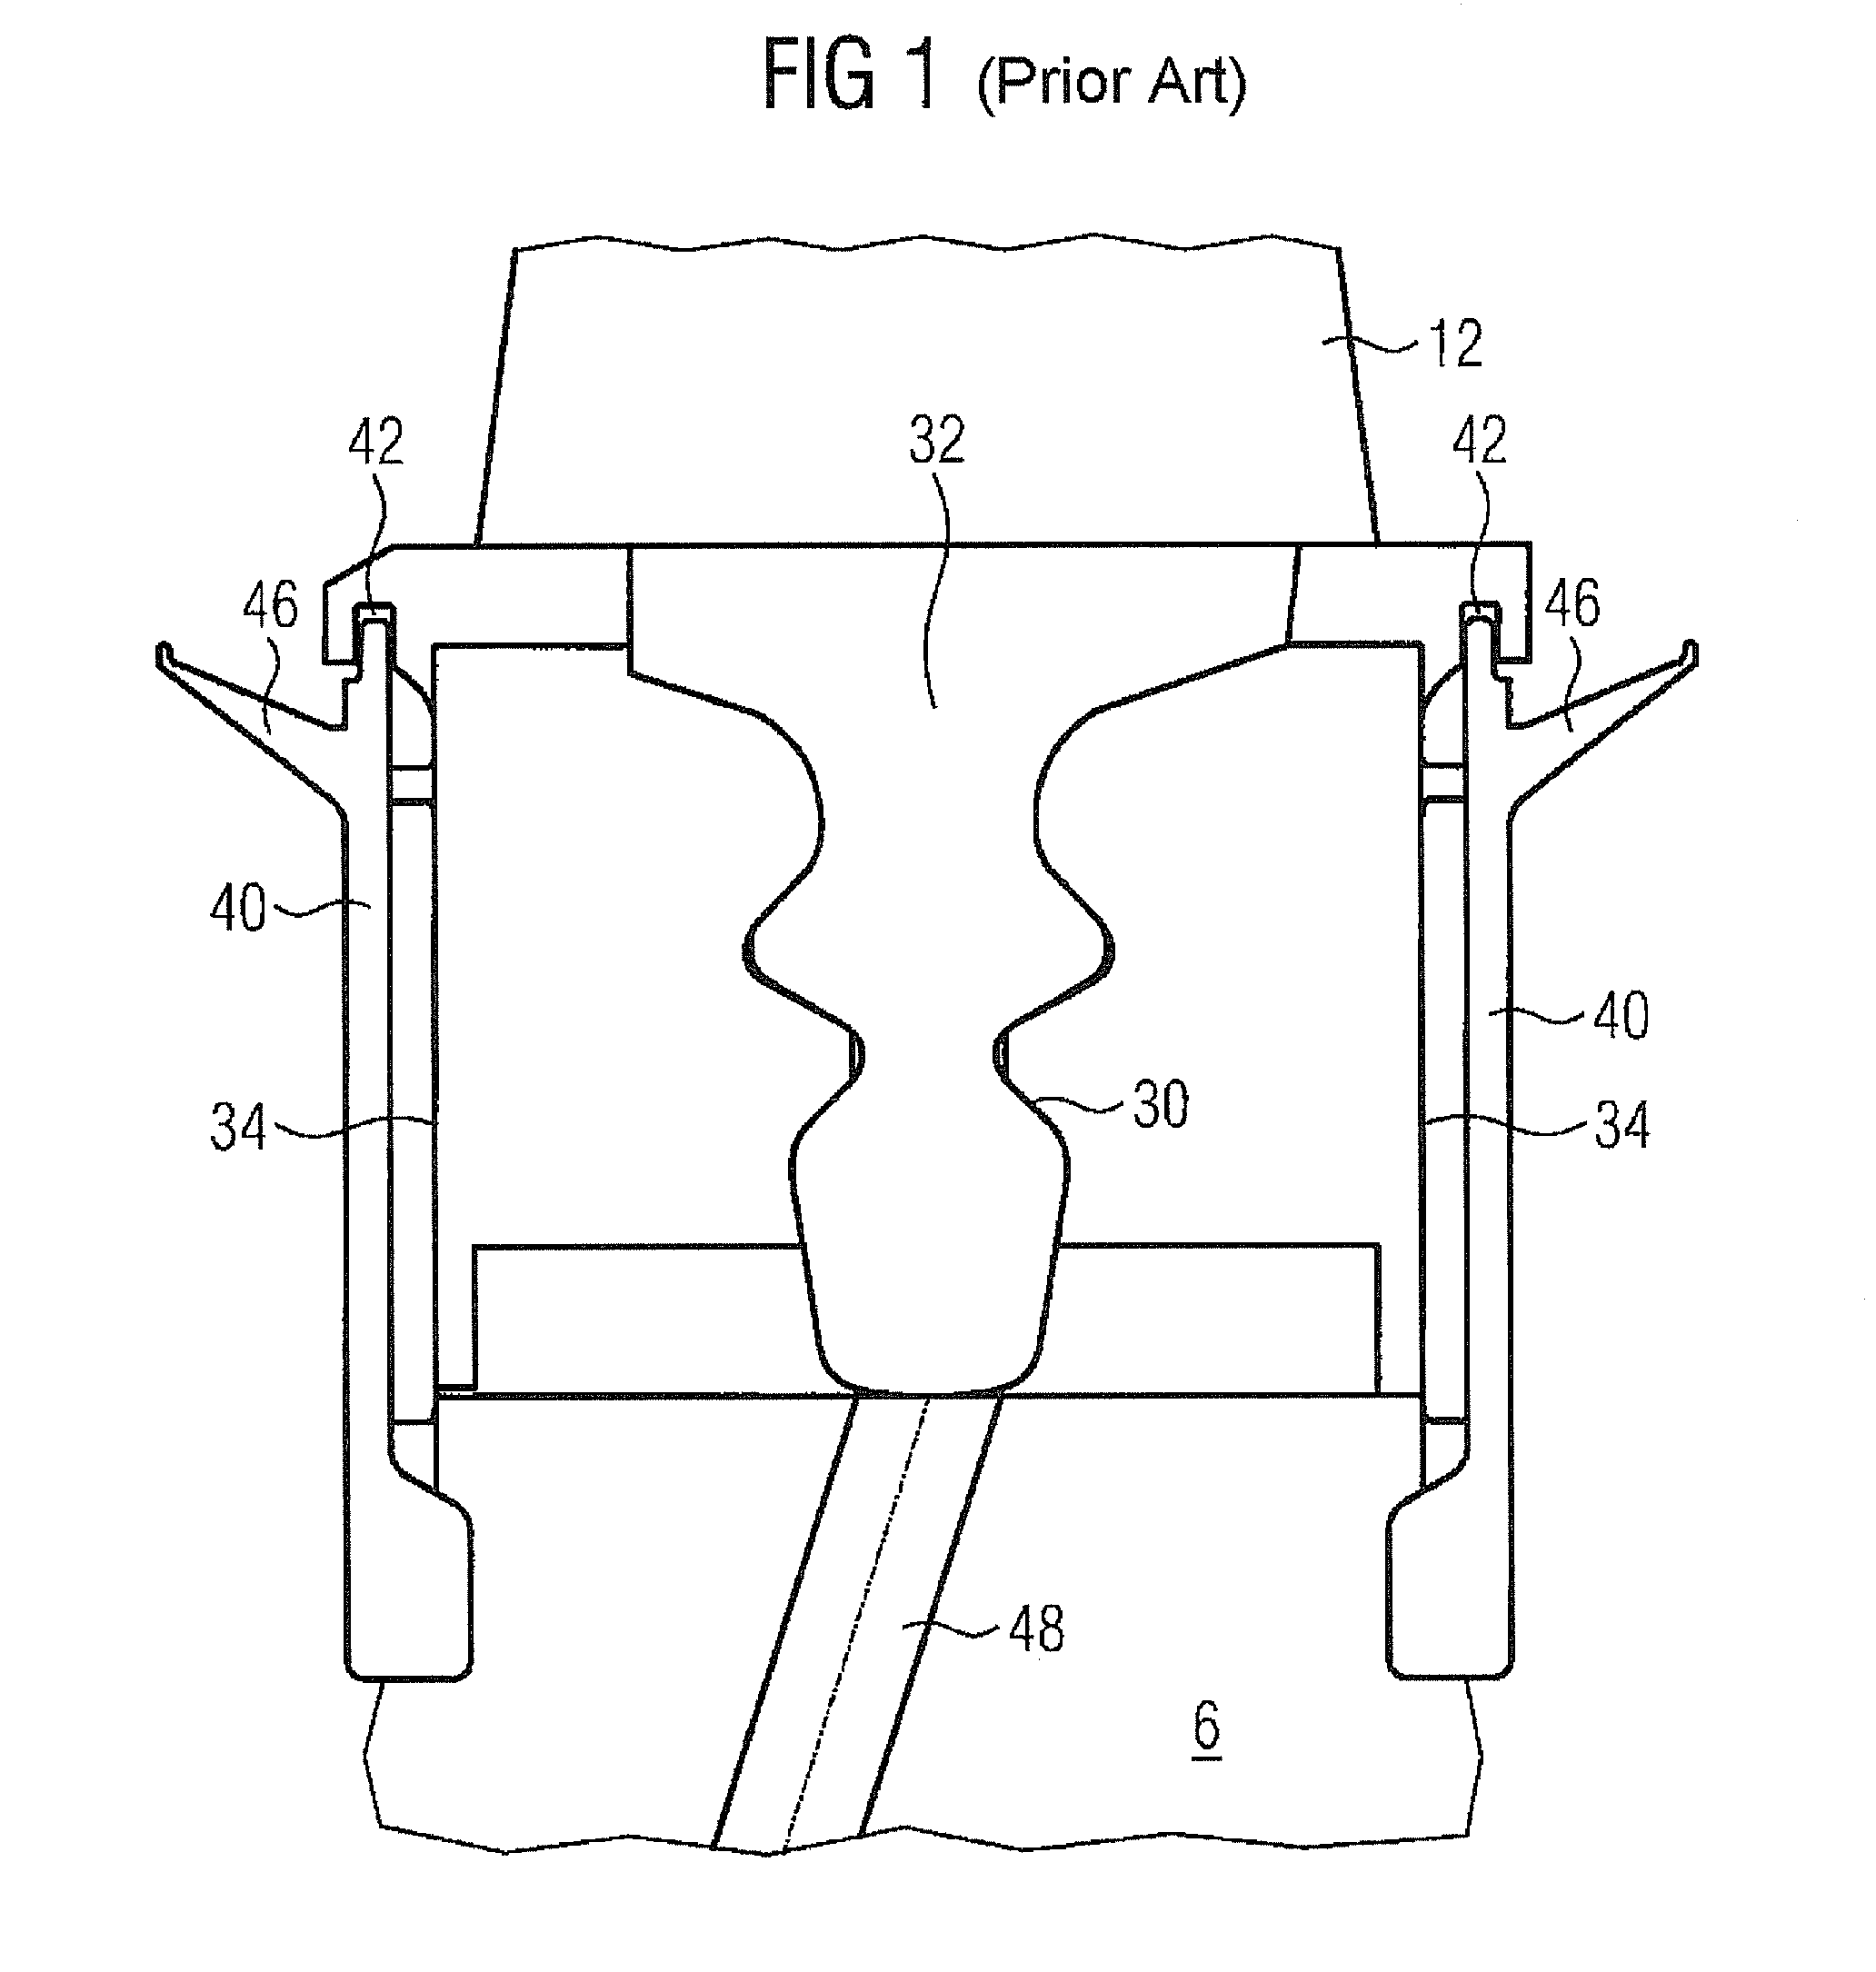 Sealing plate and rotor blade system